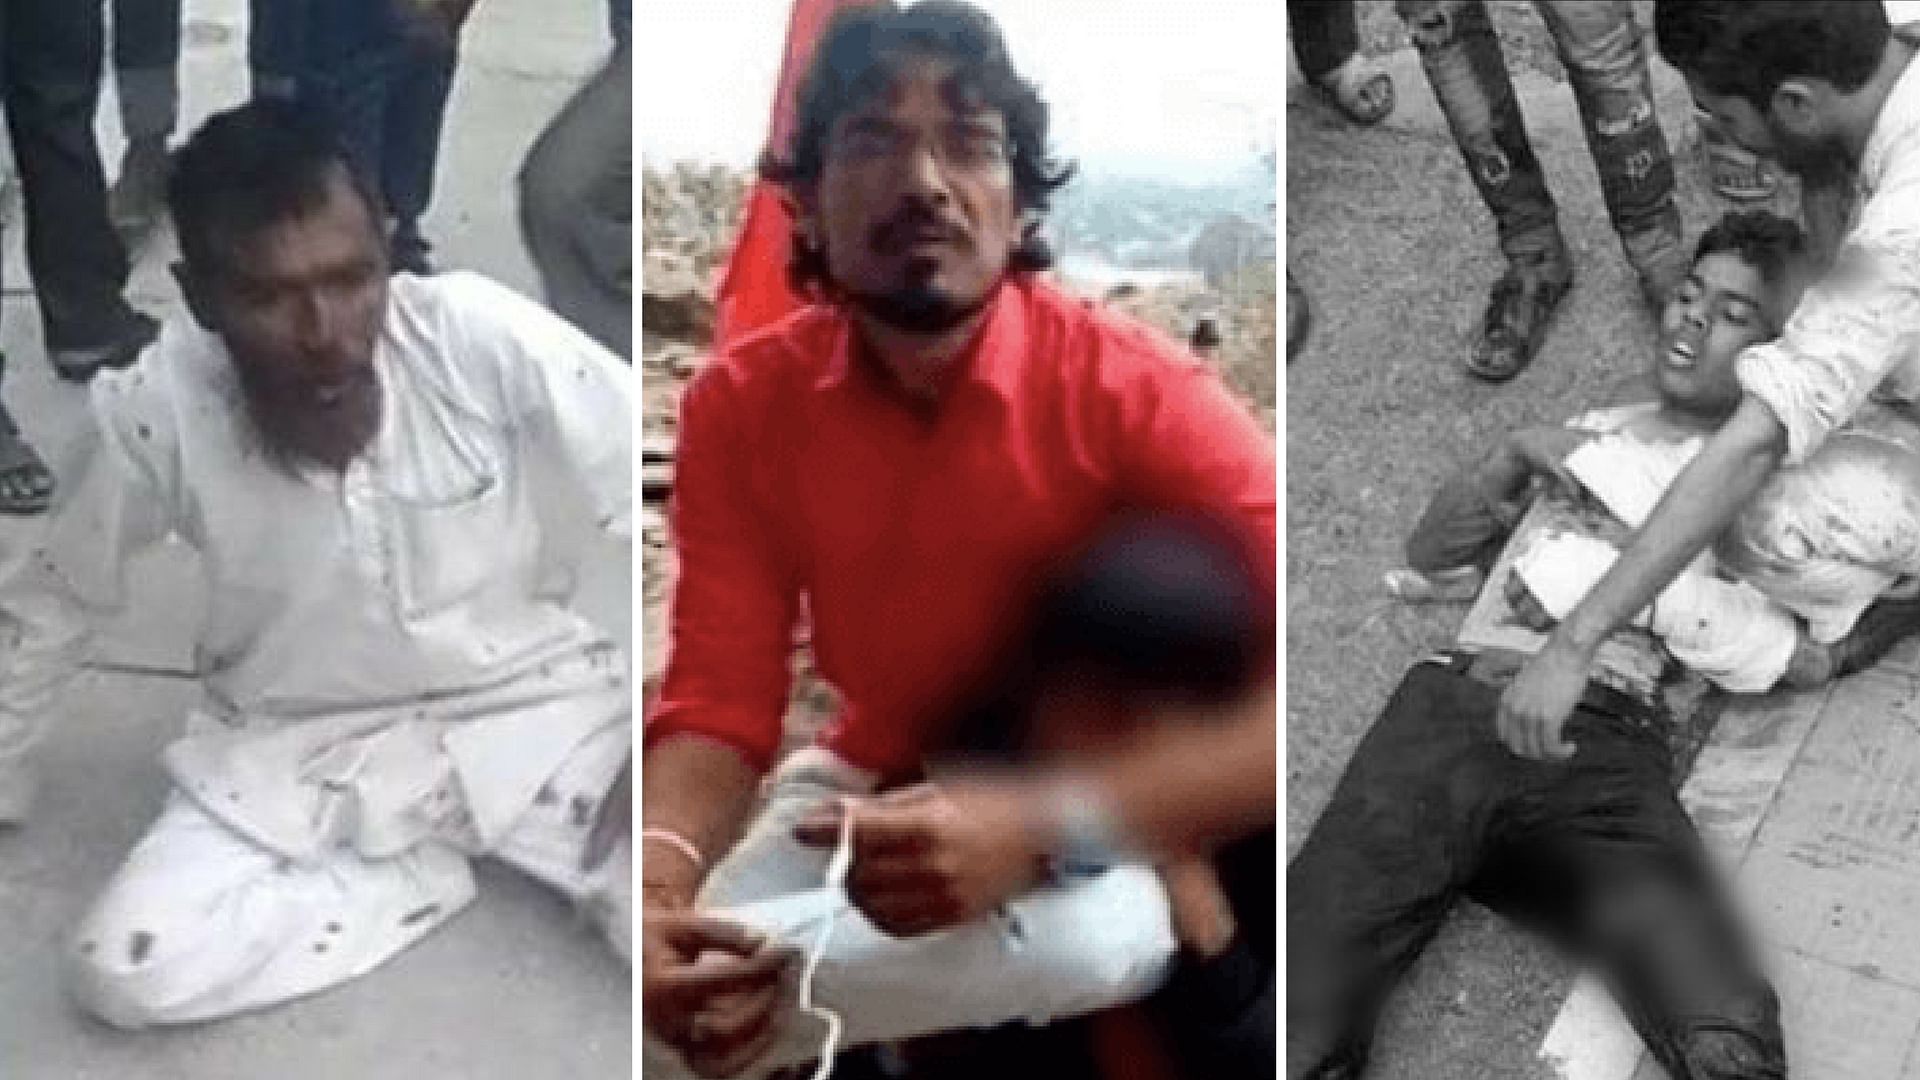 Pehlu Khan (left) was lynched in Alwar in April, Shambulal Regar (center) killed and set a man on fire in Rajasthan in December, Junaid Khan (right) was stabbed to death in June.